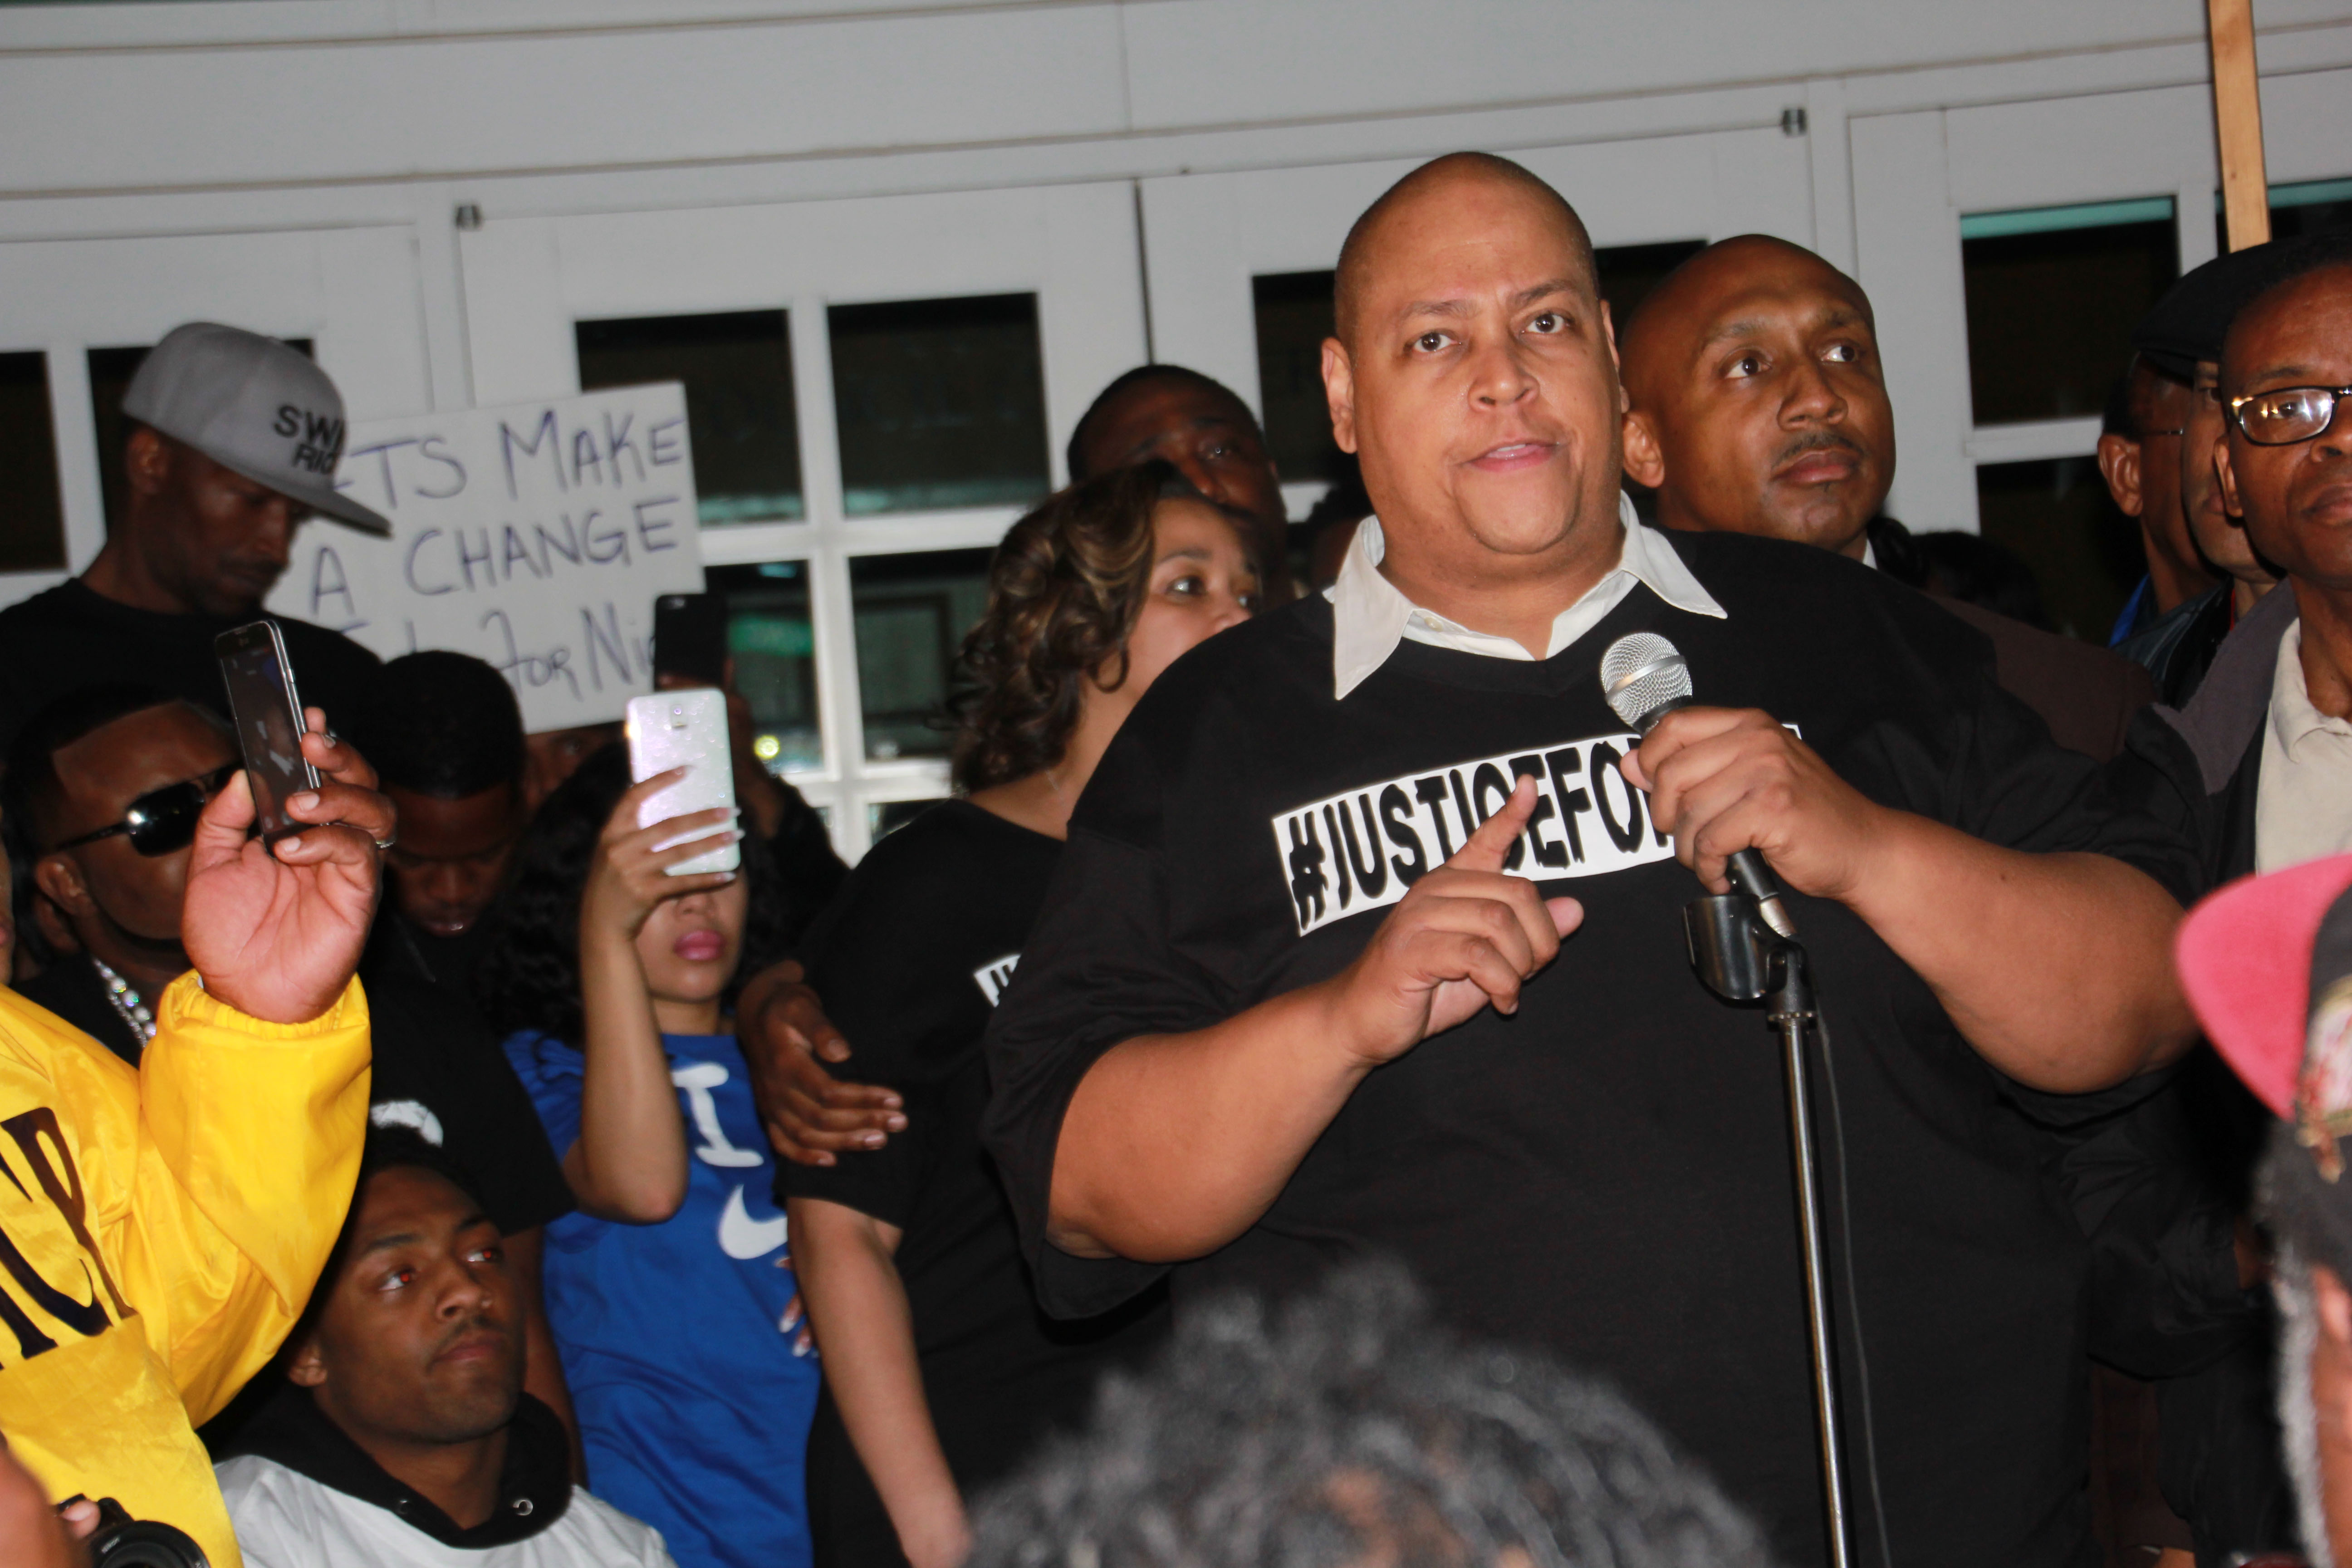 The late Nicholas Thomas' father, Huey, delivered an impassioned plea for justice for his son at a rally at Smyrna City Hall in suburban Atlanta on March 31. 